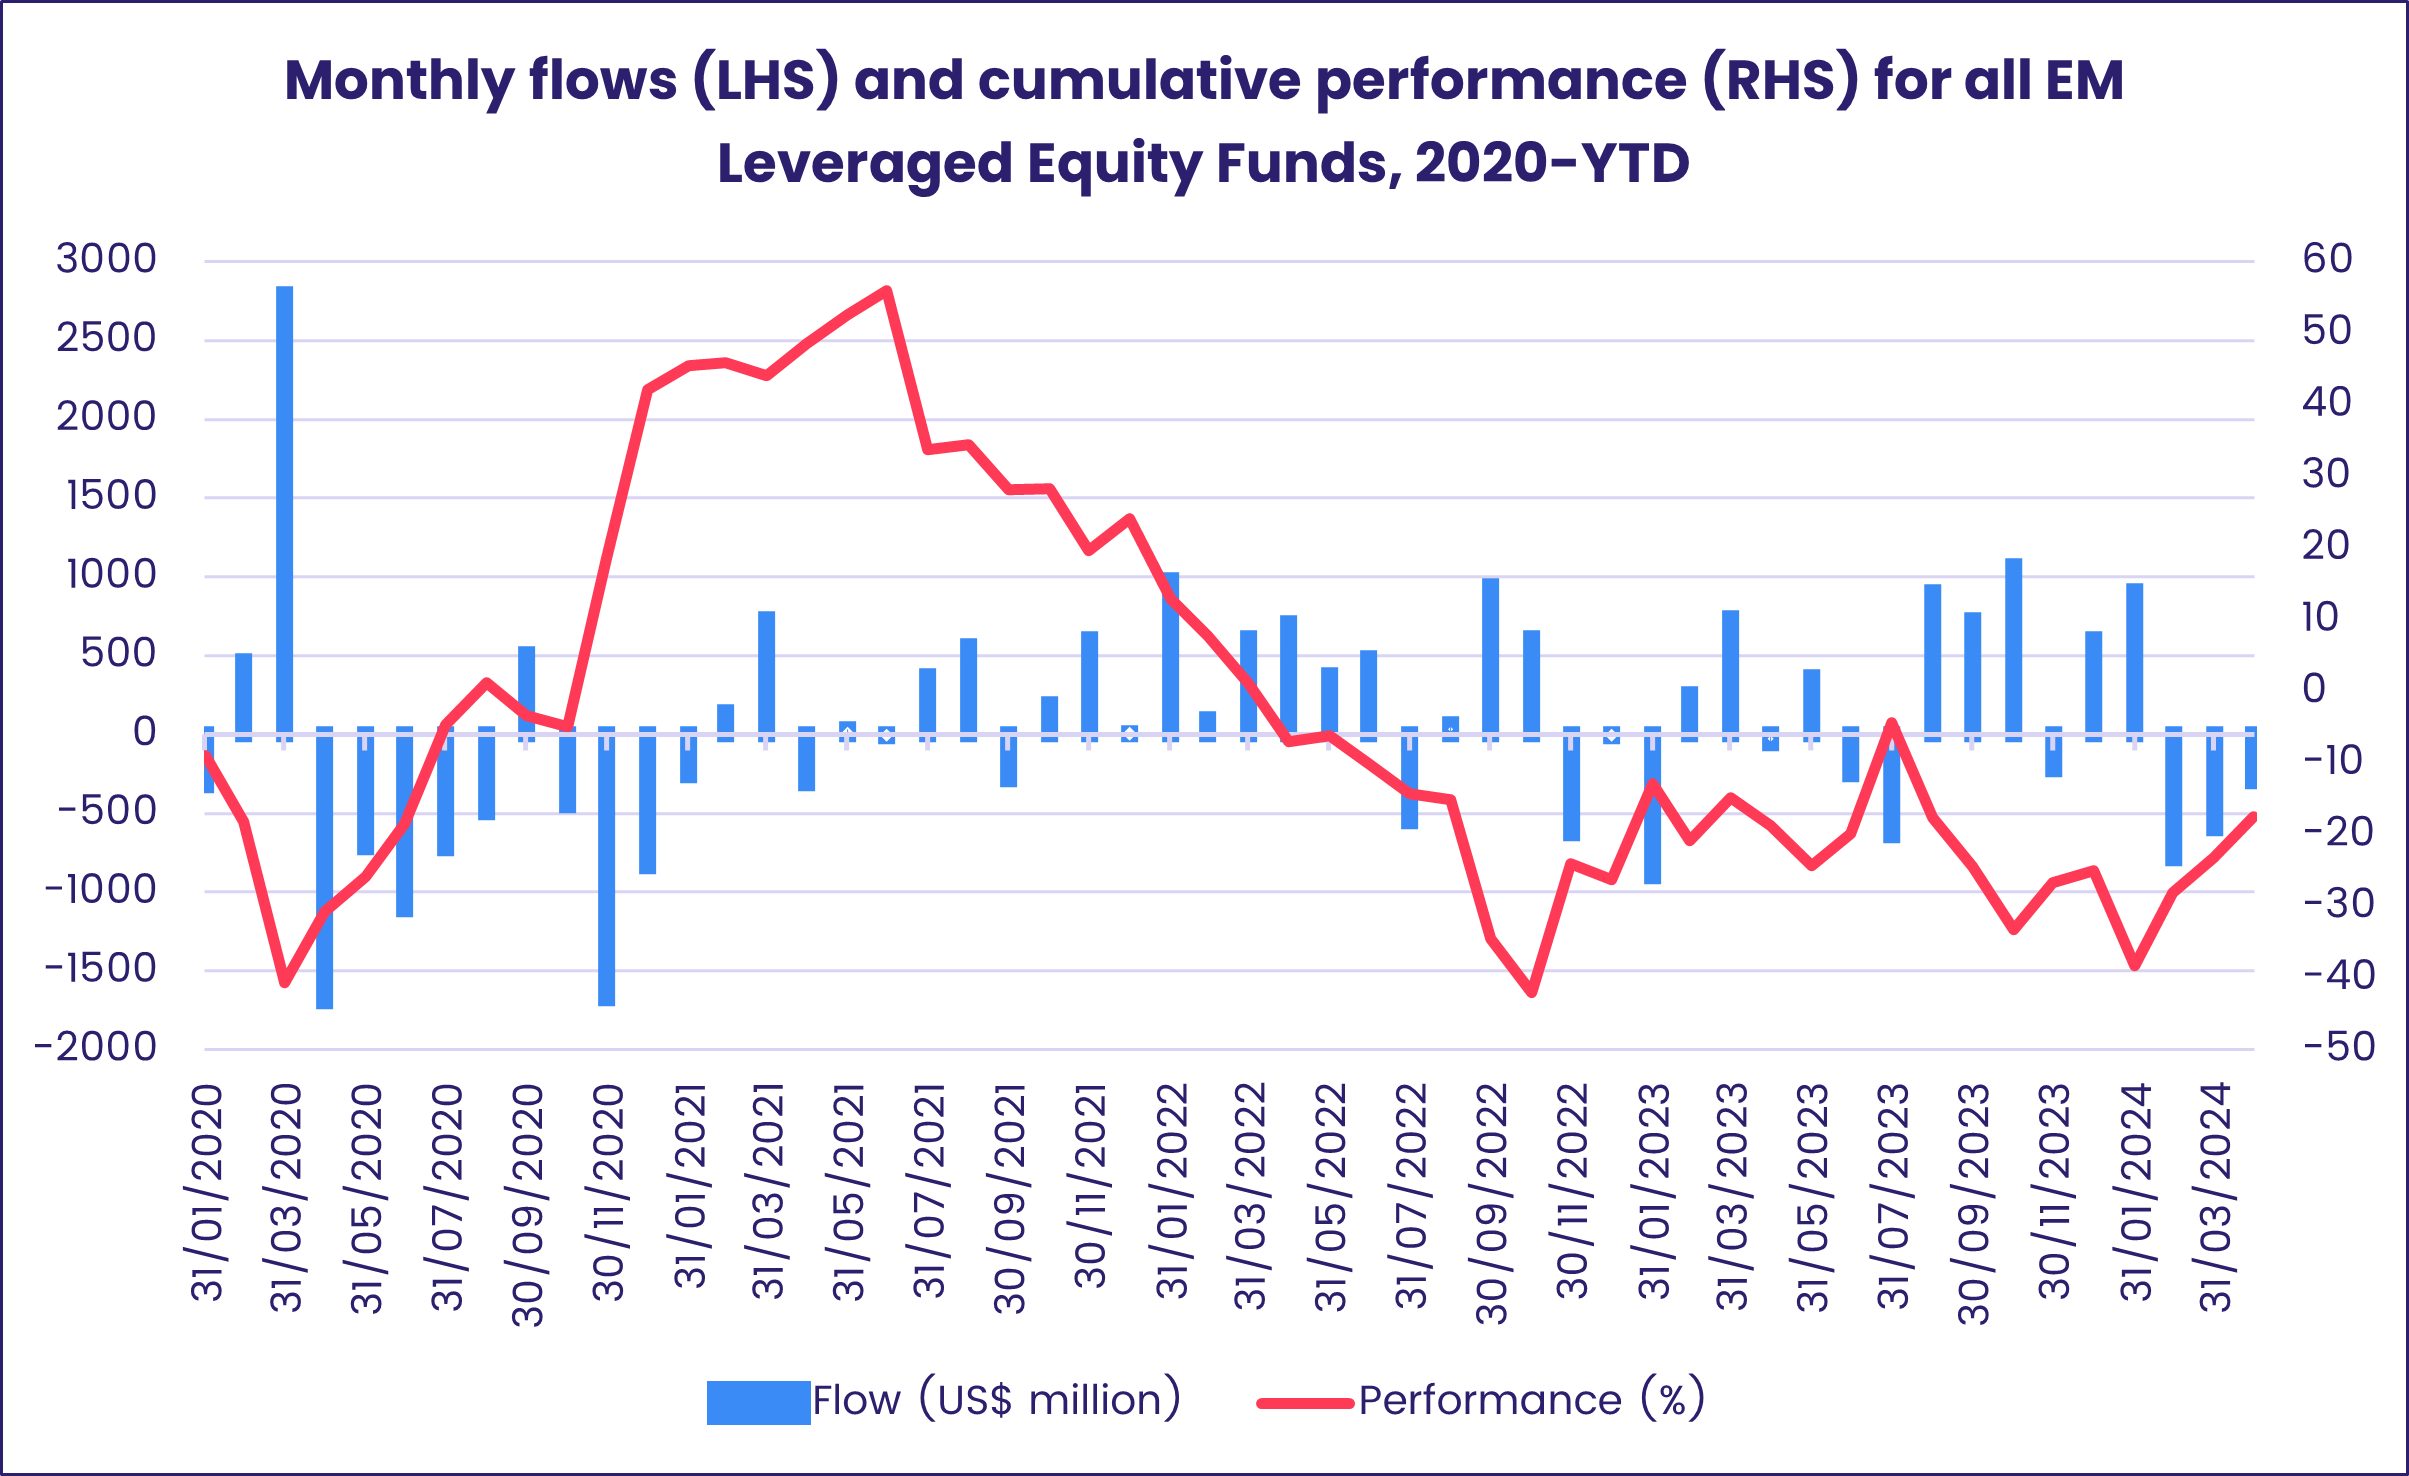 Monthly flows (LHS) and cumulative performance (RHS) for all EM Leveraged Equity Funds, 2020-YTD